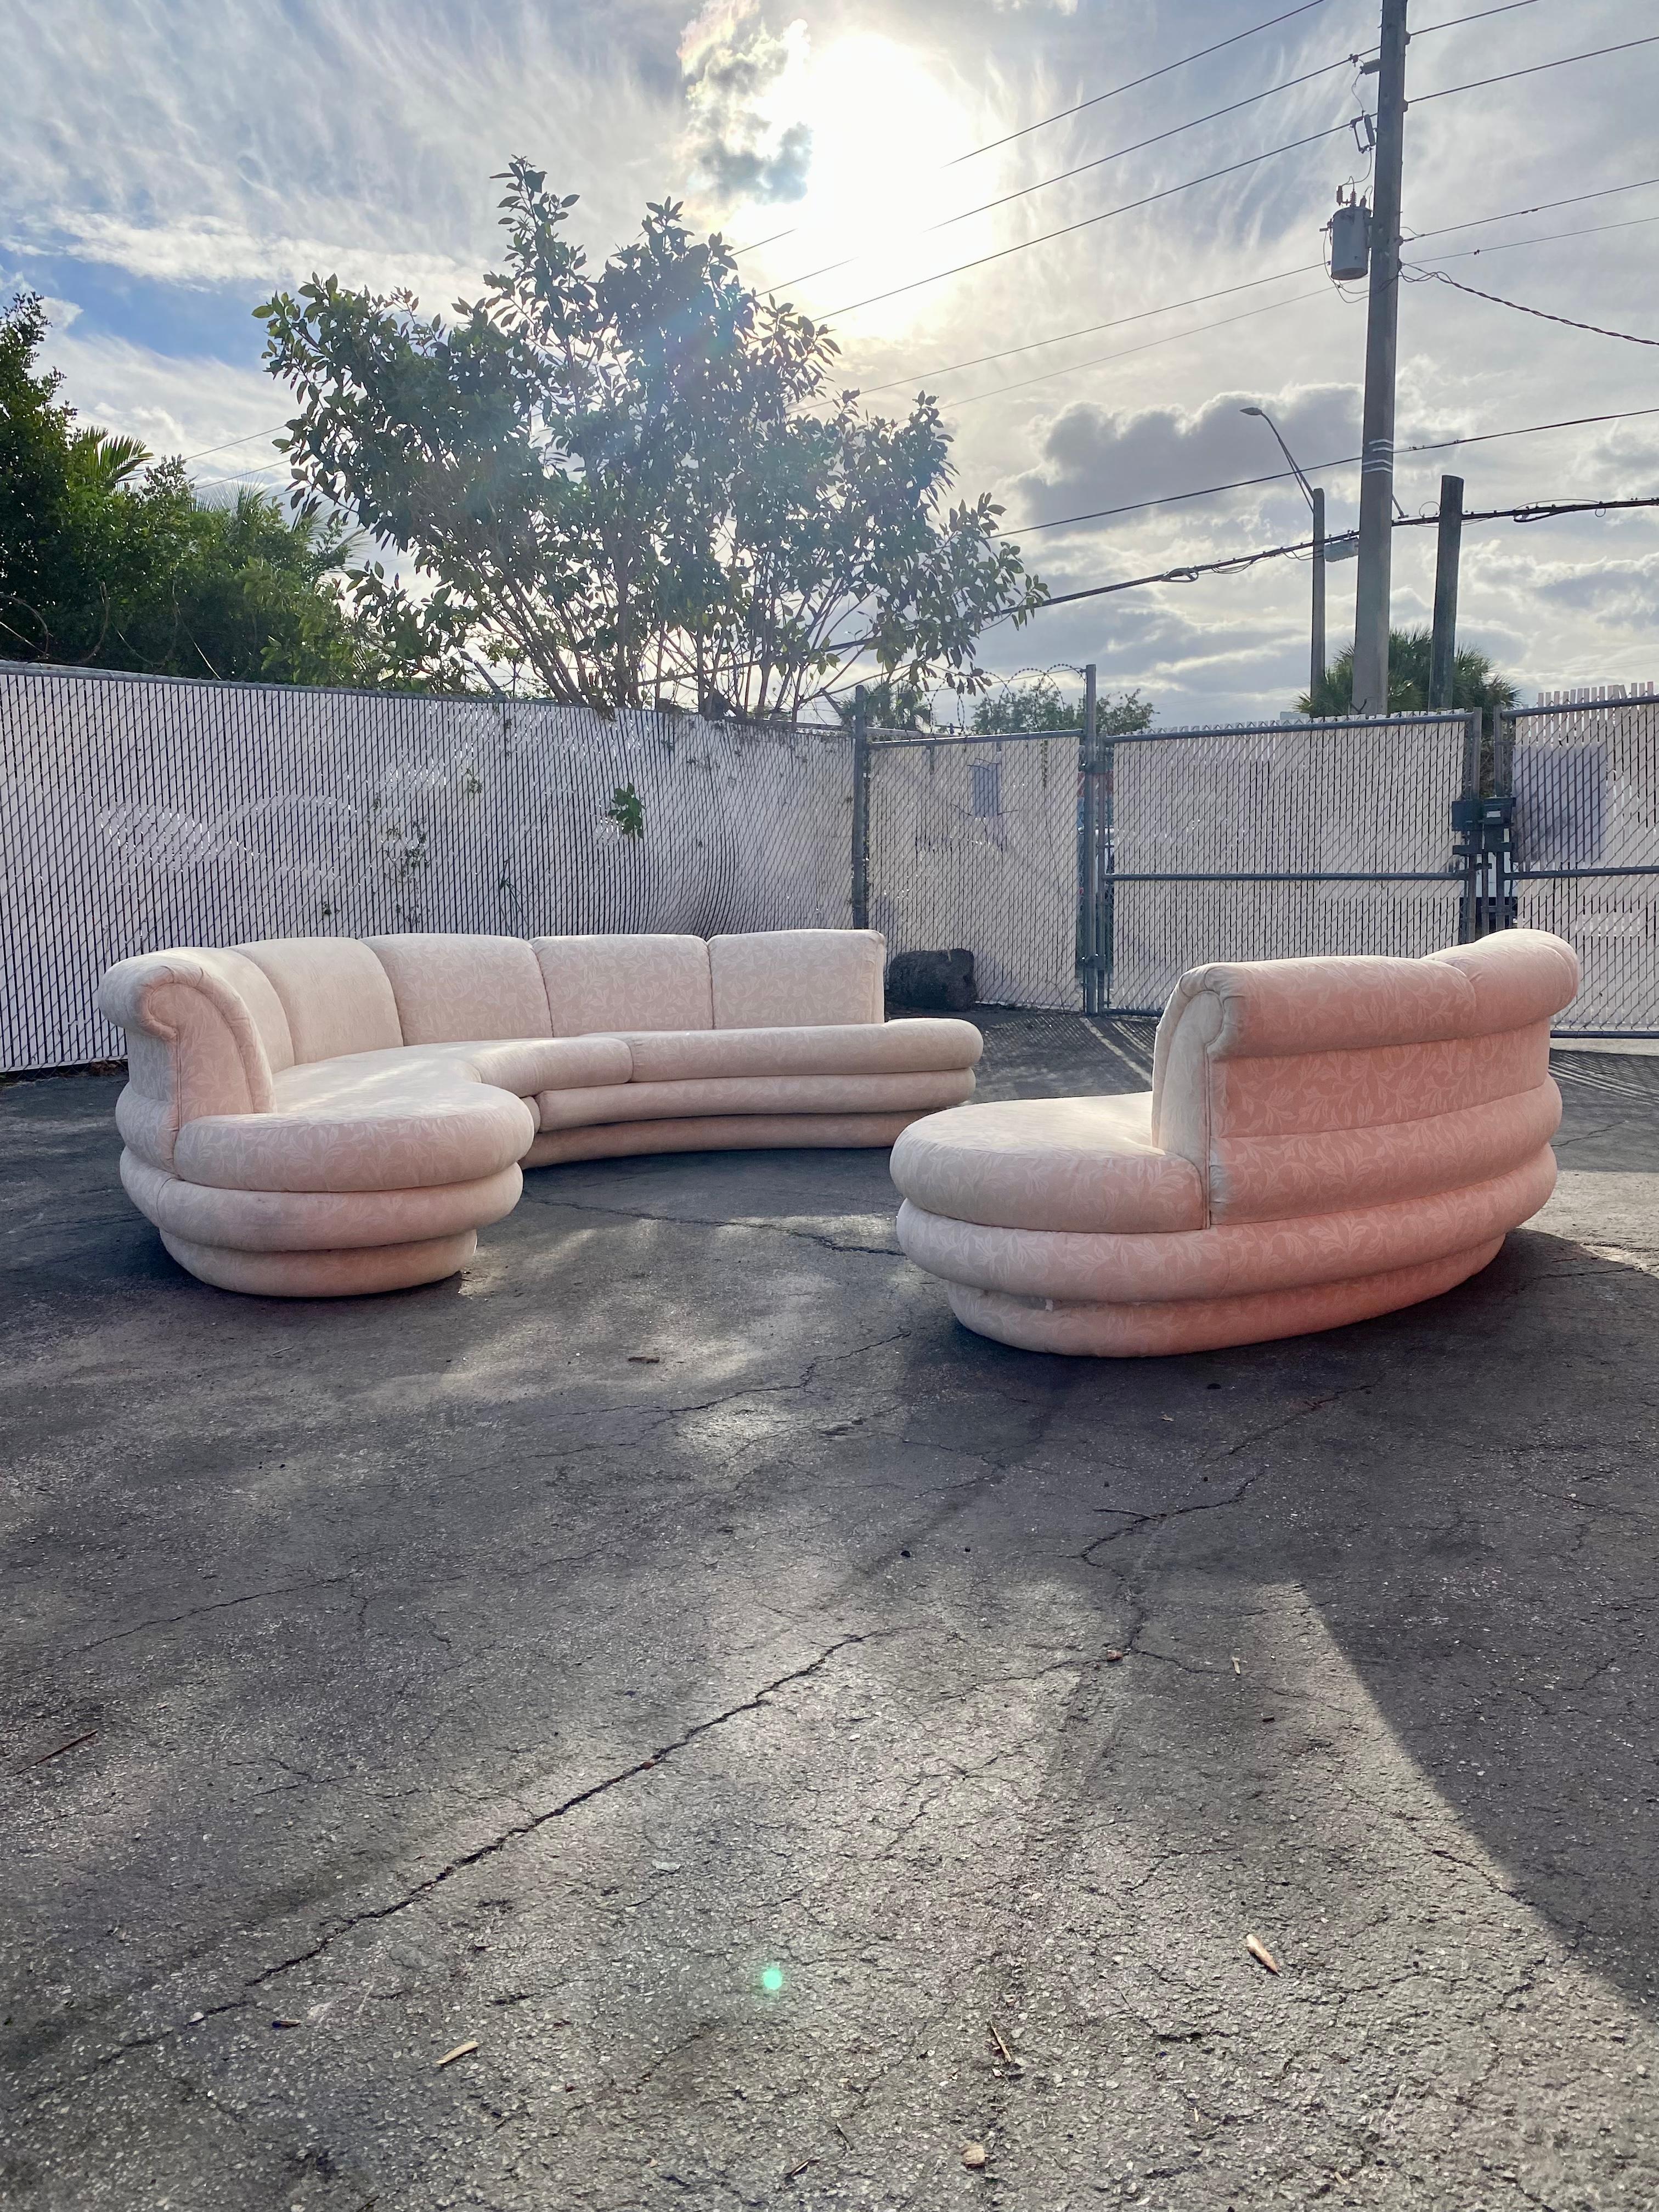 On offer on this occasion is one of the most stunning, rare sectional you could hope to find. Outstanding design is exhibited throughout. The beautiful sectional is statement piece which is also extremely comfortable and packed with personality!!